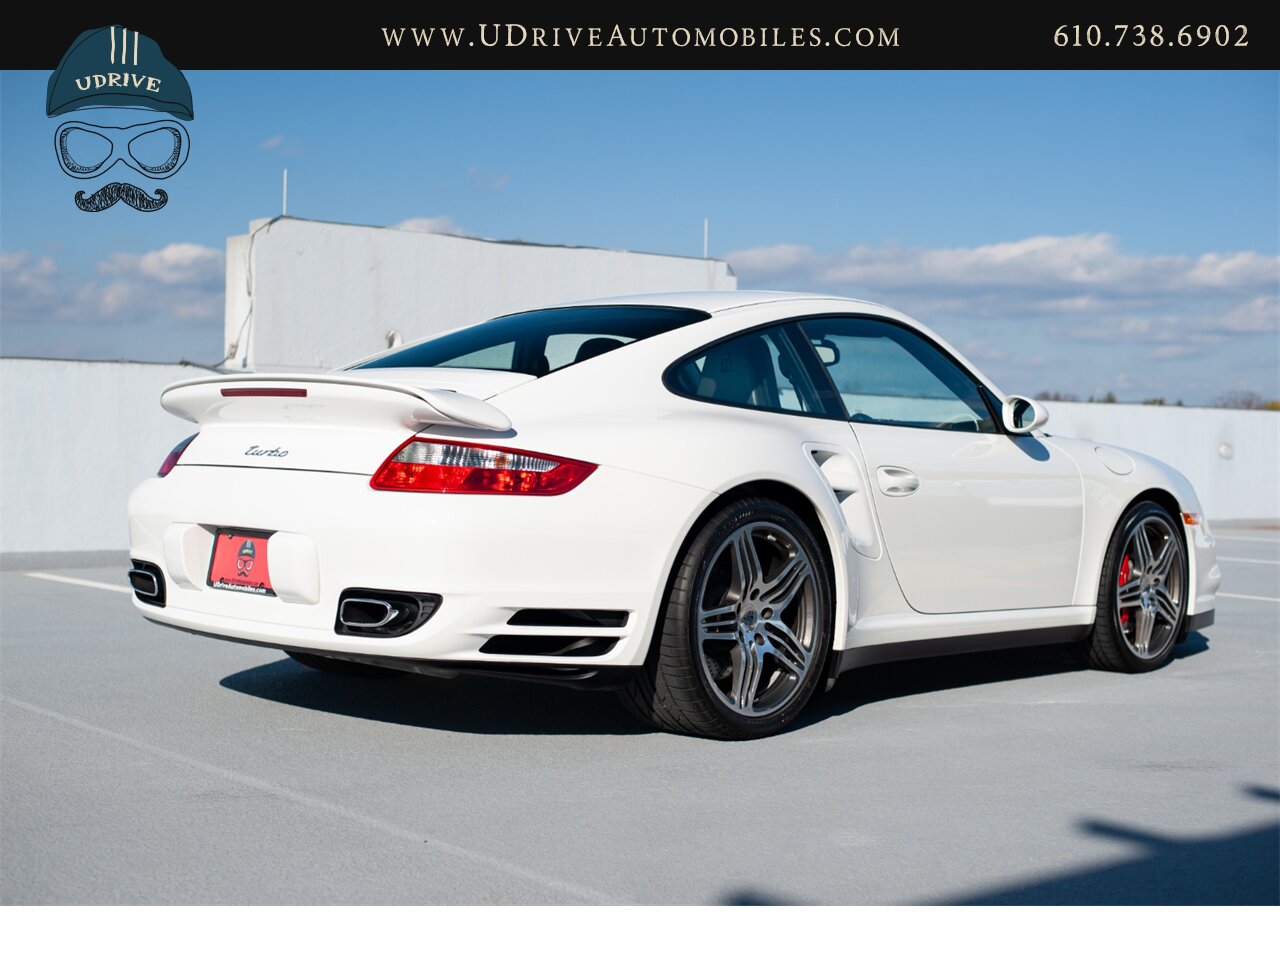 2007 Porsche 911 Turbo 642 Miles 1 Owner Carrara White 997  Sport Chrono Adaptive Sport Seats All Documentation from New - Photo 15 - West Chester, PA 19382